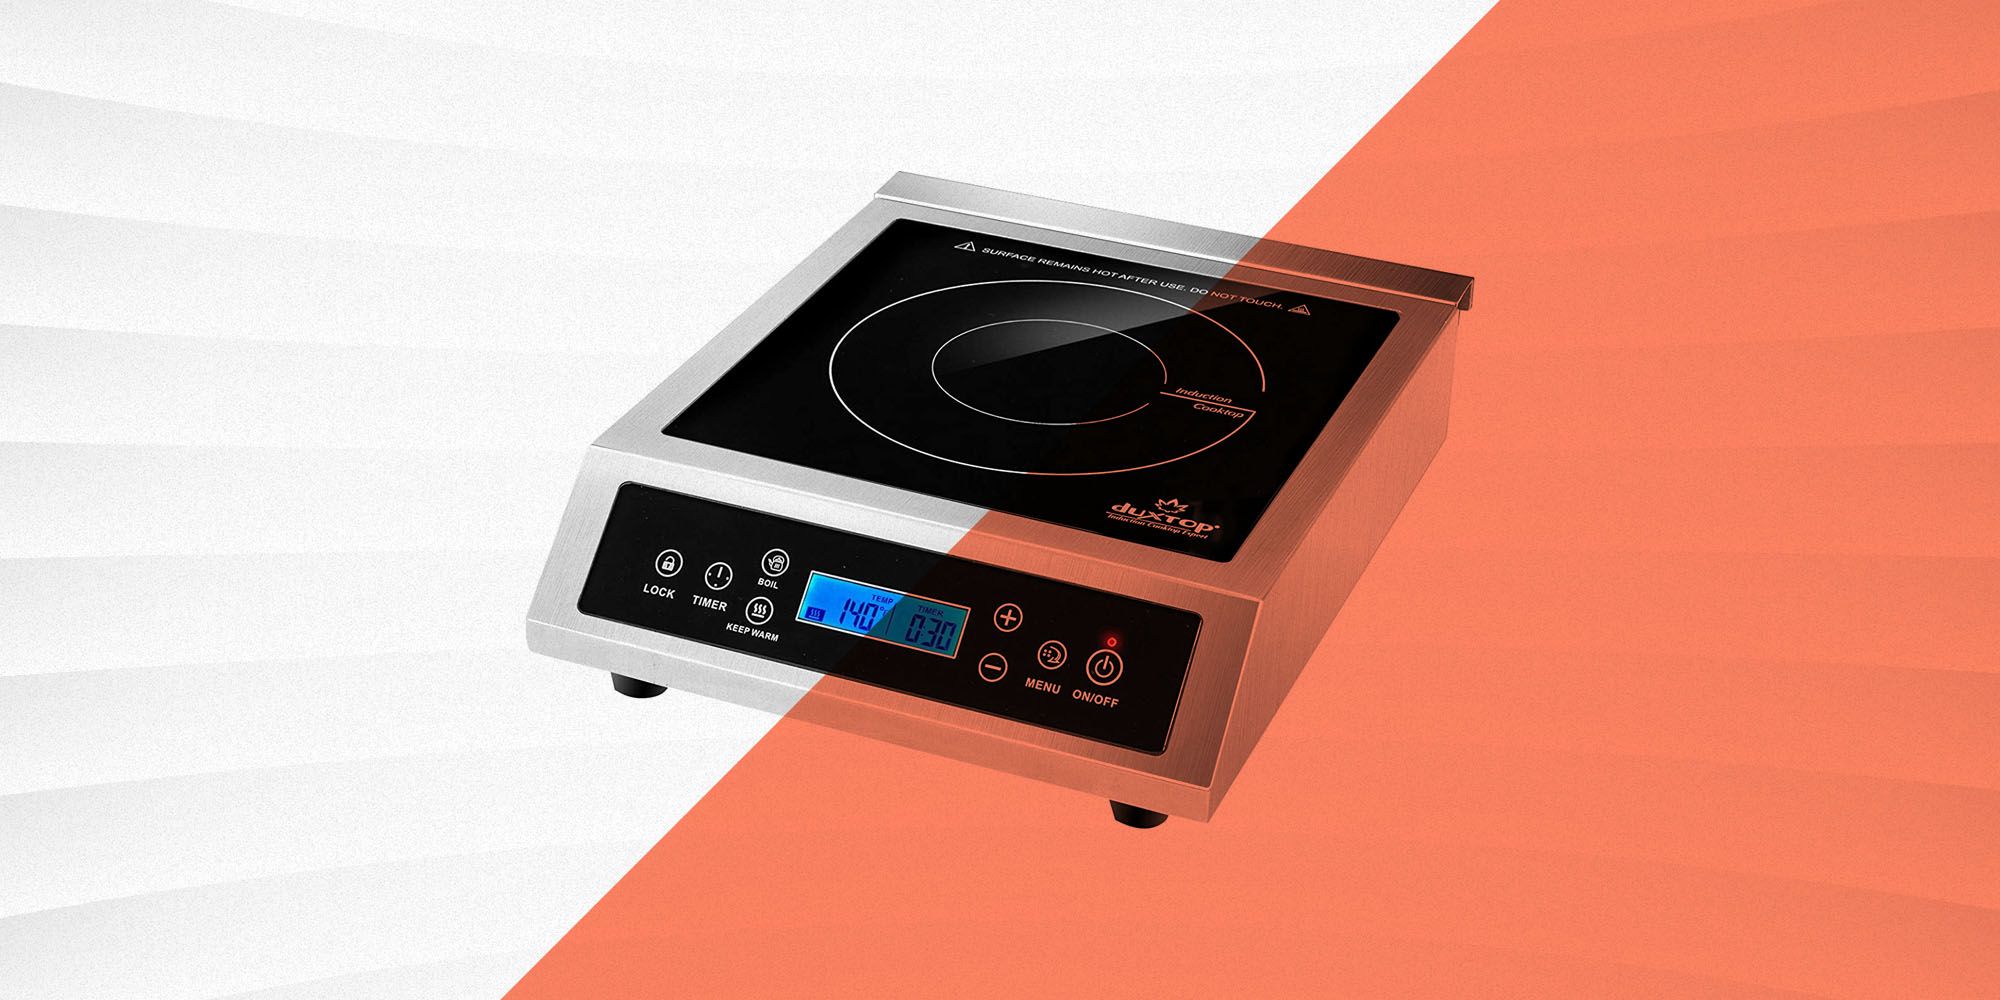 Electric burner: 10 Essential Tips for Safely Using this in Kitchen插图4